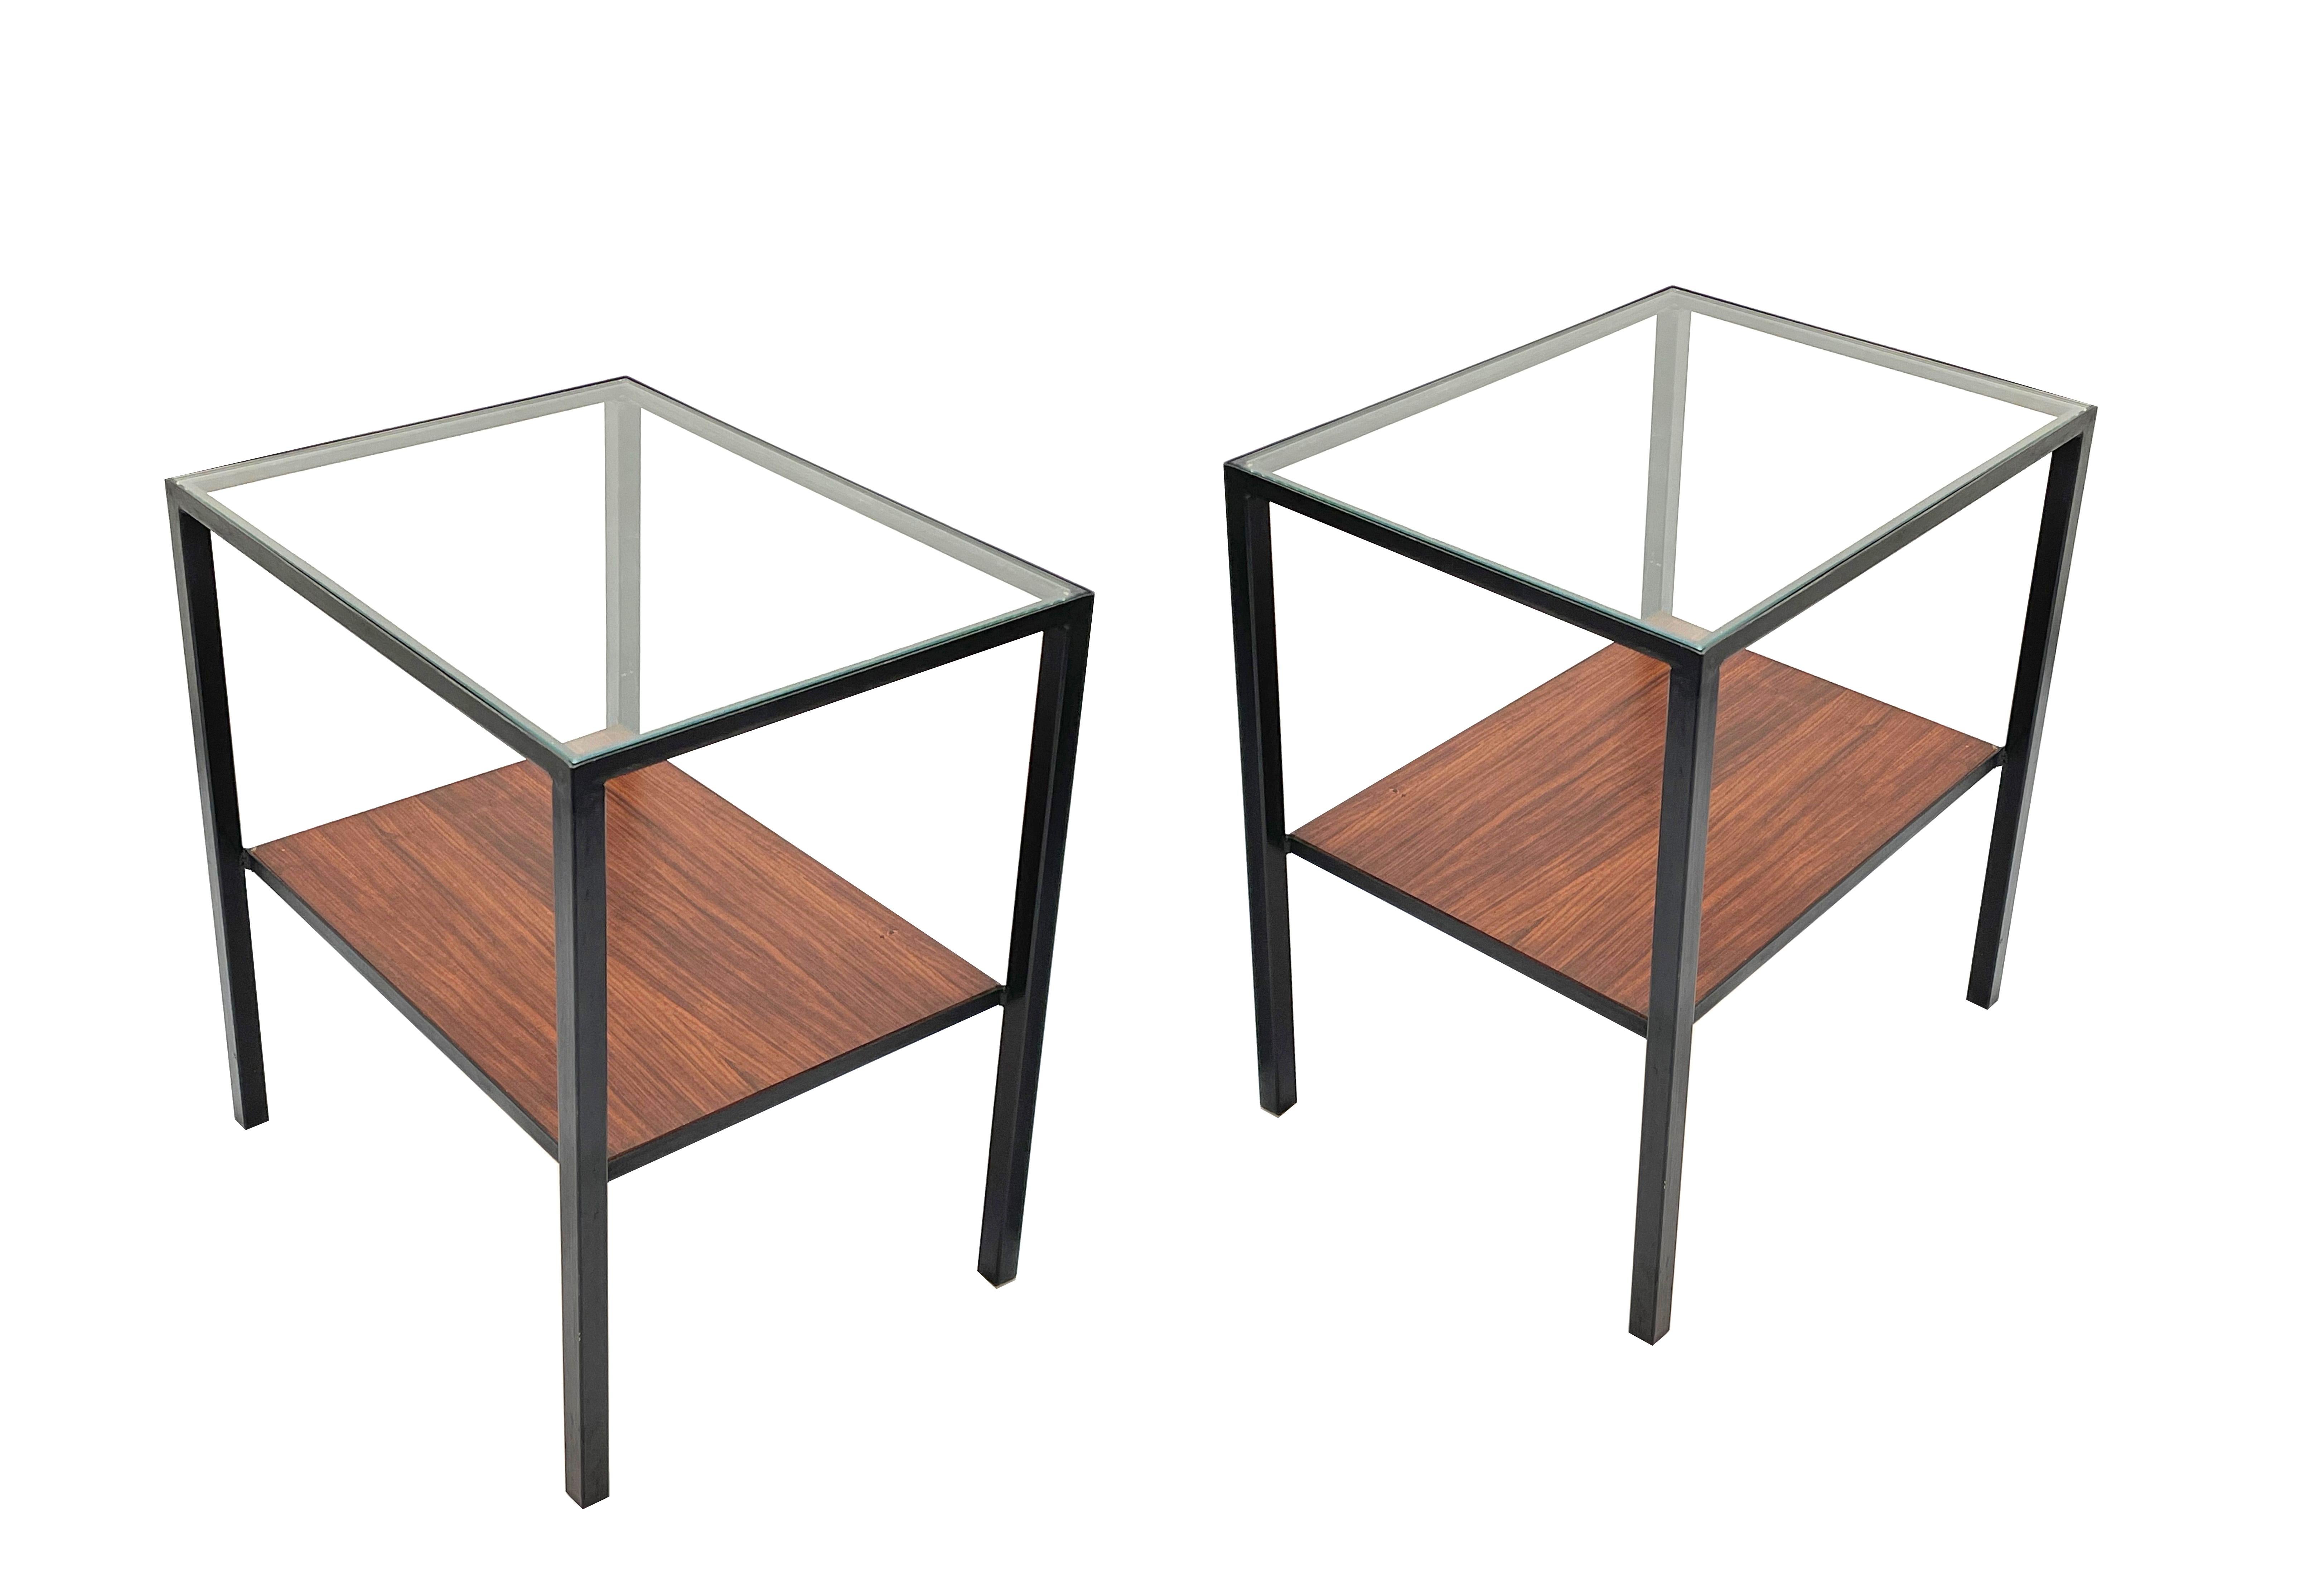 Pair of Iron, Glass and Wood Italian Coffee Table with Two Shelves, 1960s For Sale 9